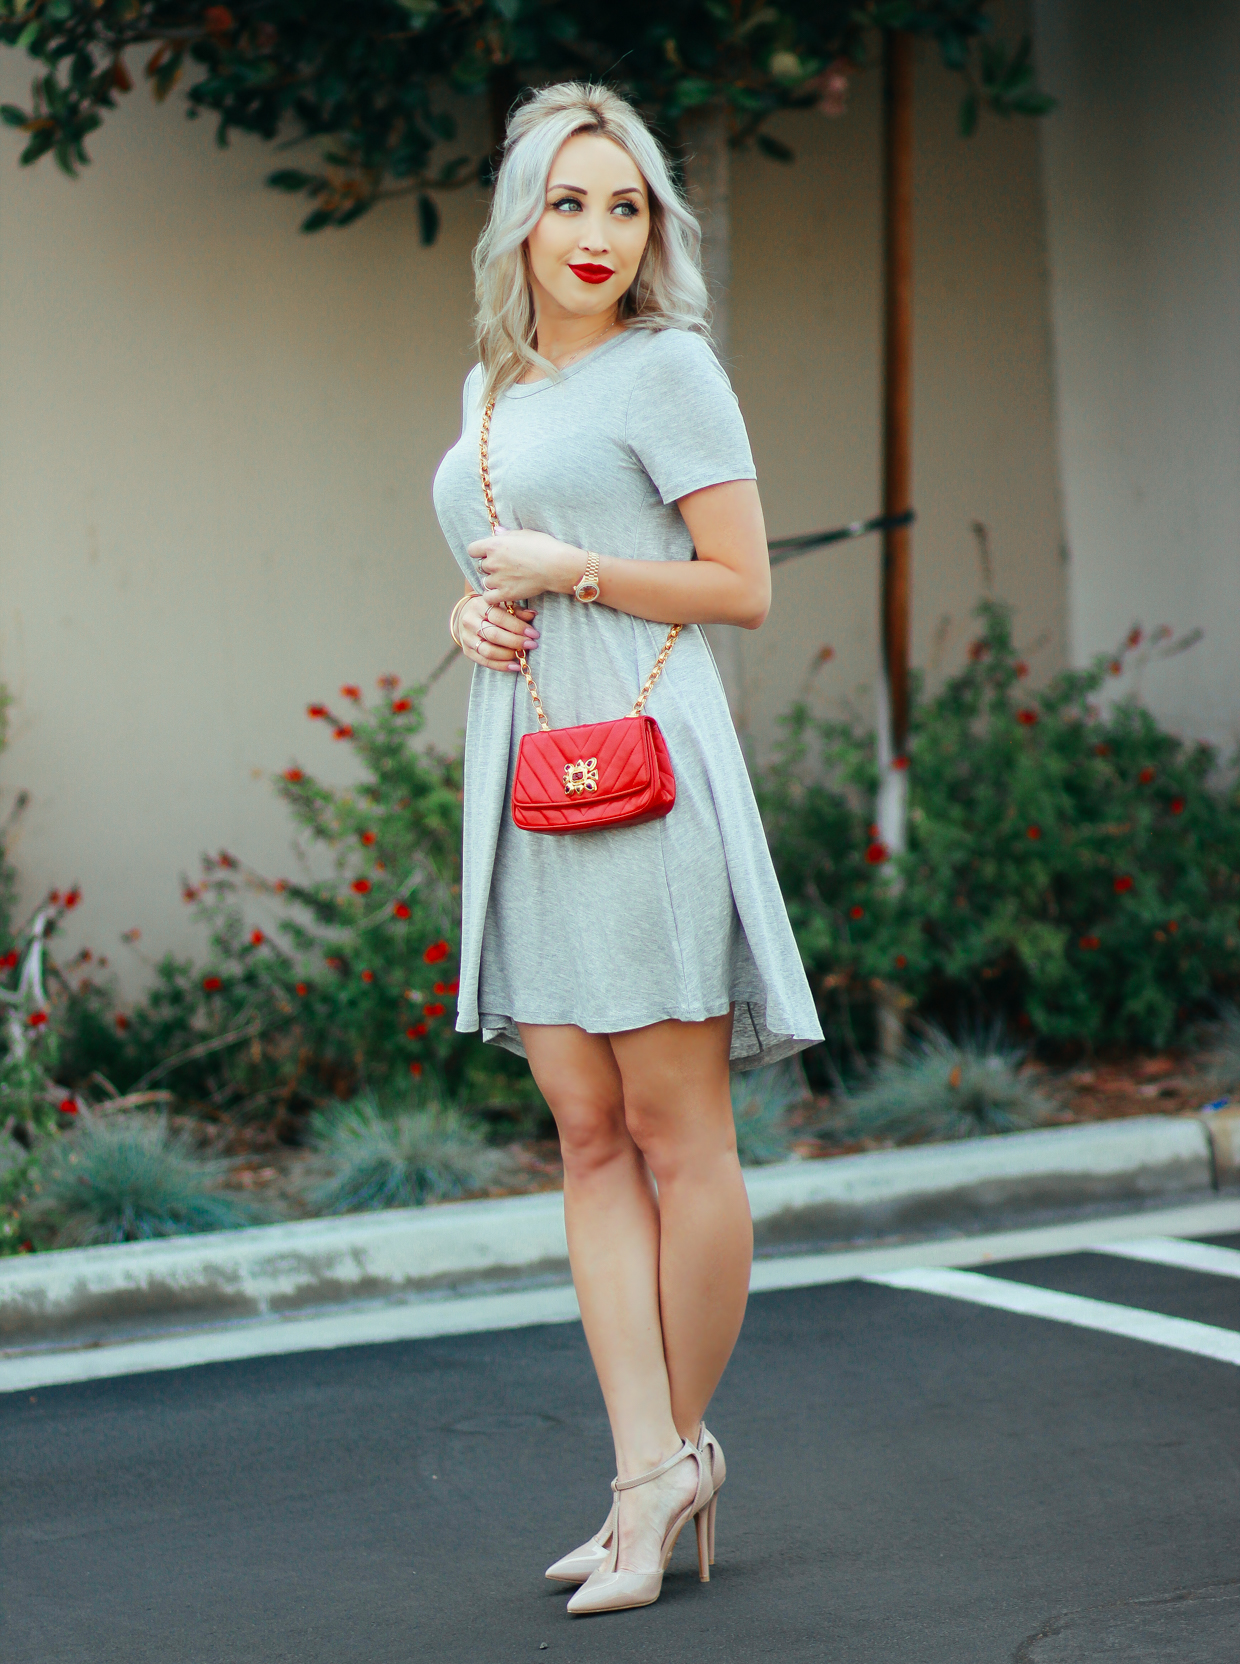 Blondie in the City | Simple Grey T-Shirt Dress from @anglclothing | Grey & Red #OOTD